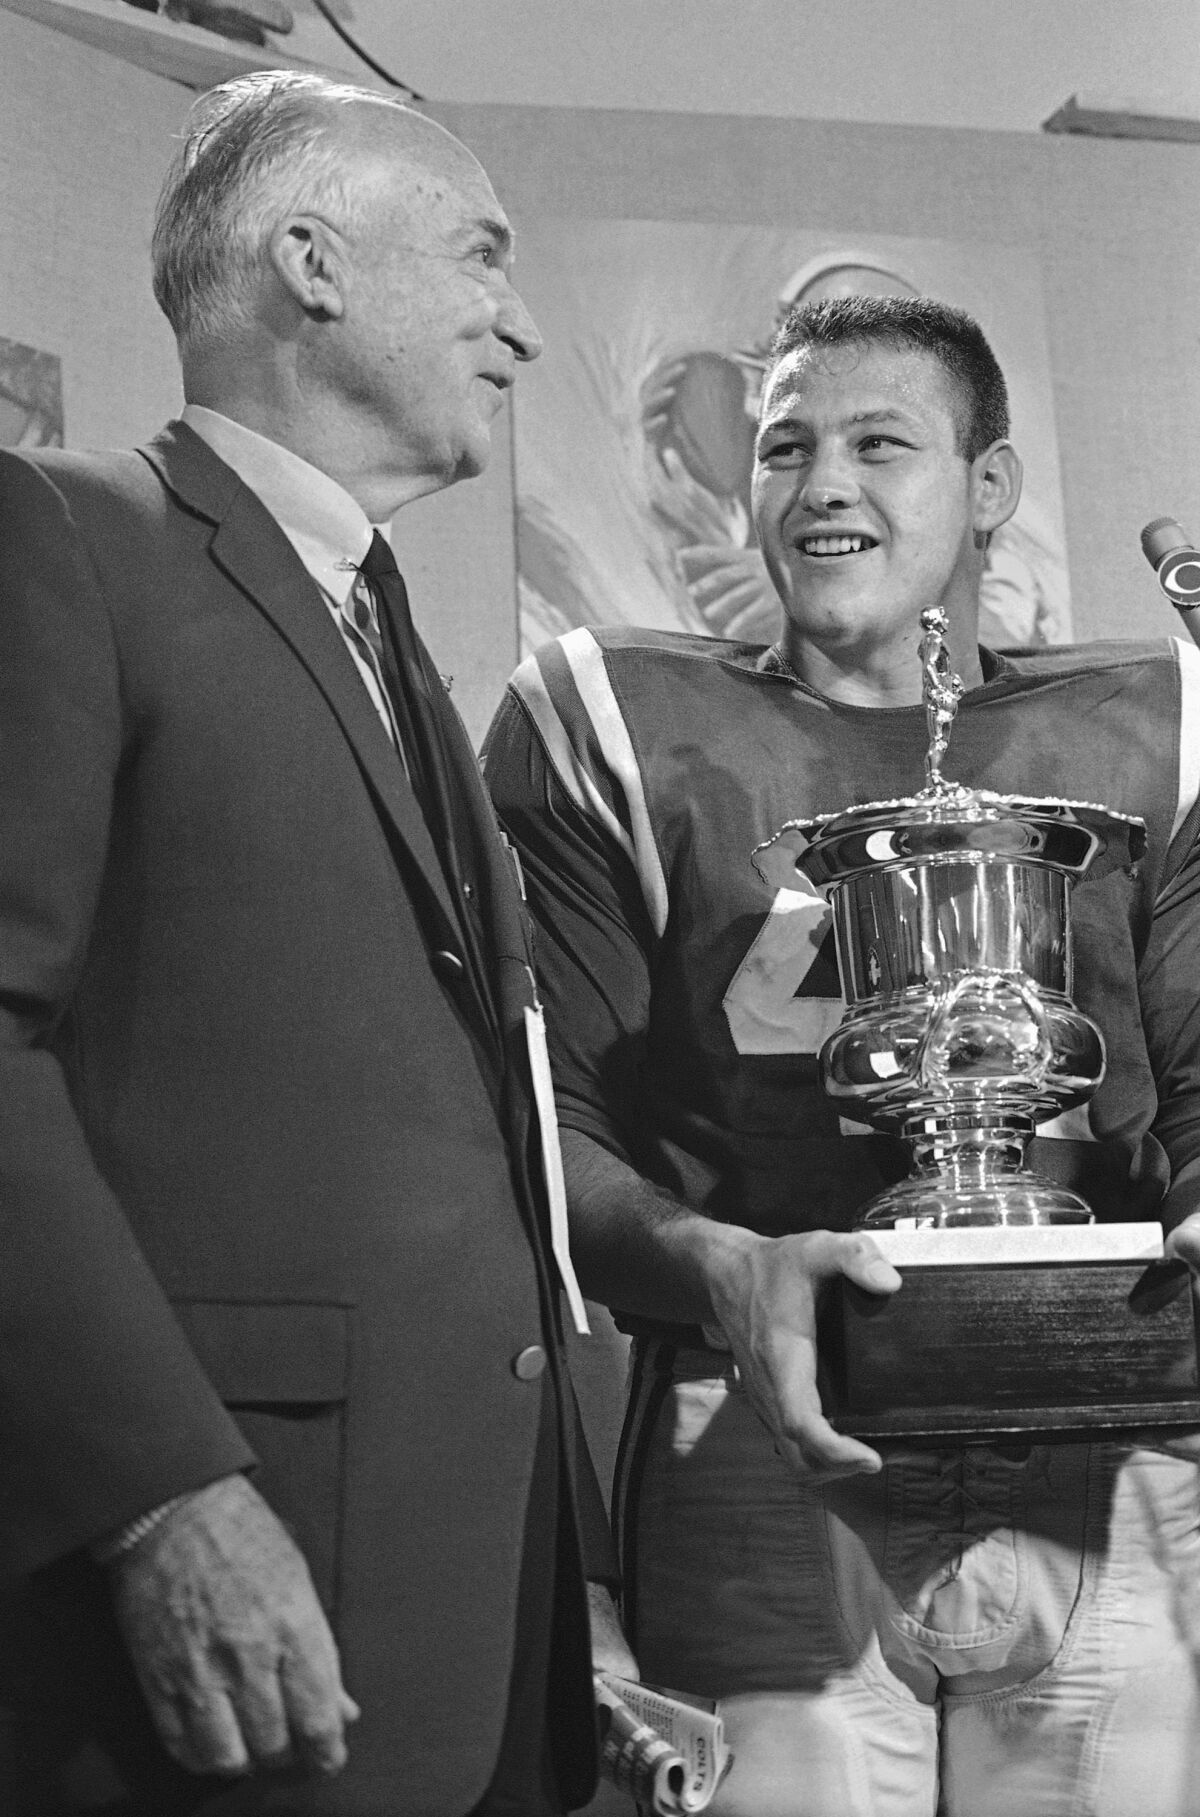 FILE - Van C. Kussrow, left, from the Orange Bowl Committee, presents Baltimore Colts quarterback Tom Matte with the Most Valuable Player trophy after the Colts defeated the Dallas Cowboys 53-3 on Jan. 9, 1966, in Miami. Matte, who spent his entire 12-year NFL career as a gritty running back for the Baltimore Colts _ except for a star turn for three games in 1965 as their quarterback _ has died. He was 82. The Baltimore Ravens confirmed Matte's death during coach John Harbaugh's news conference Wednesday, Nov. 3, 2021. No details were provided.(AP Photo/File)